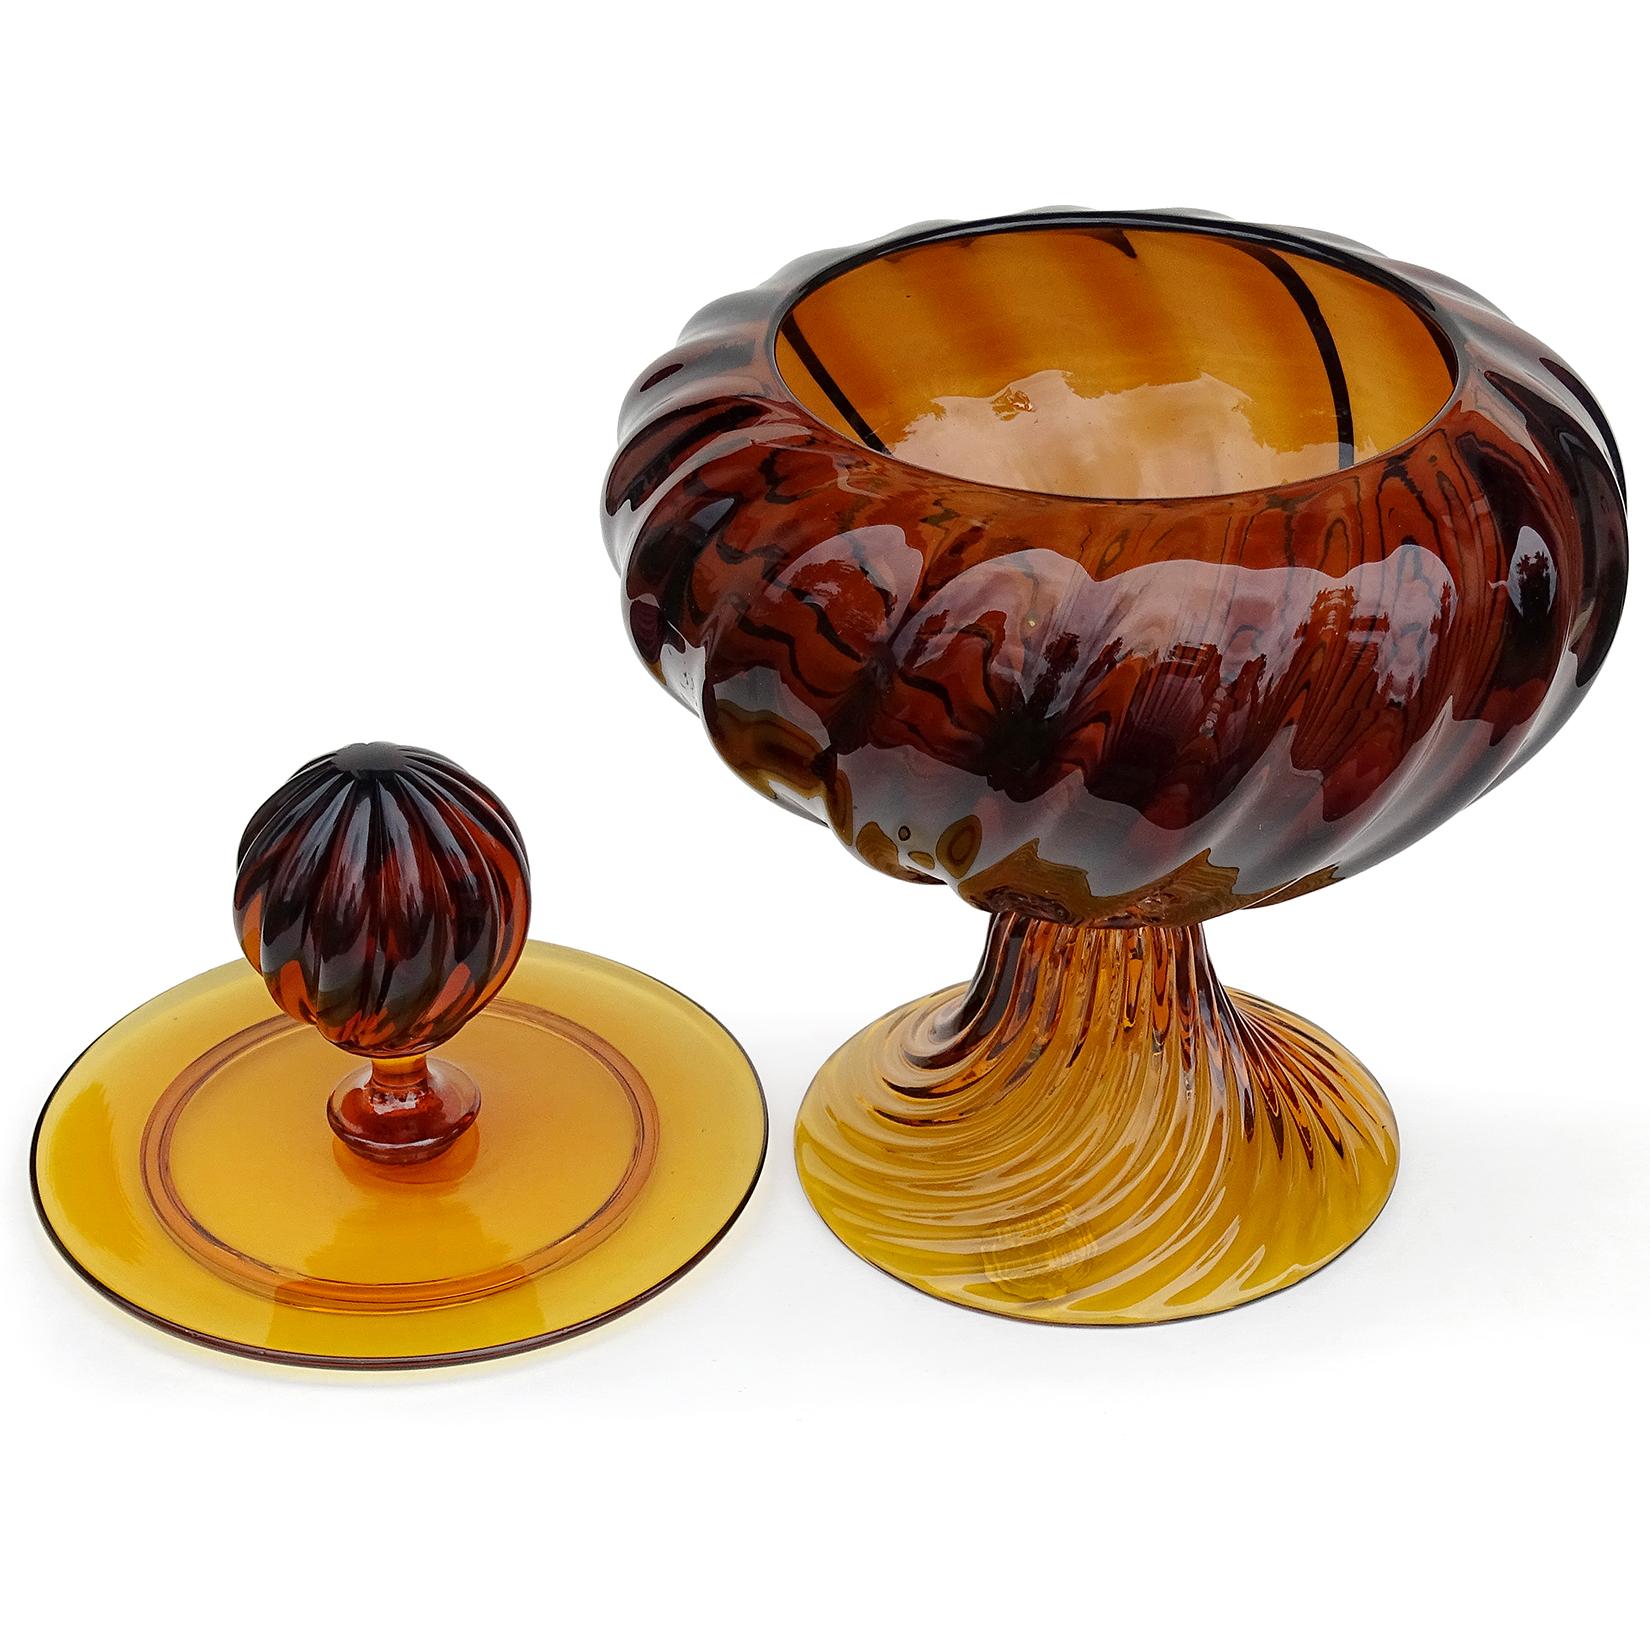 Beautiful vintage Murano hand blown dark amber honey Italian art glass cookie jar or container. In the manner of Empoli glass, with a 